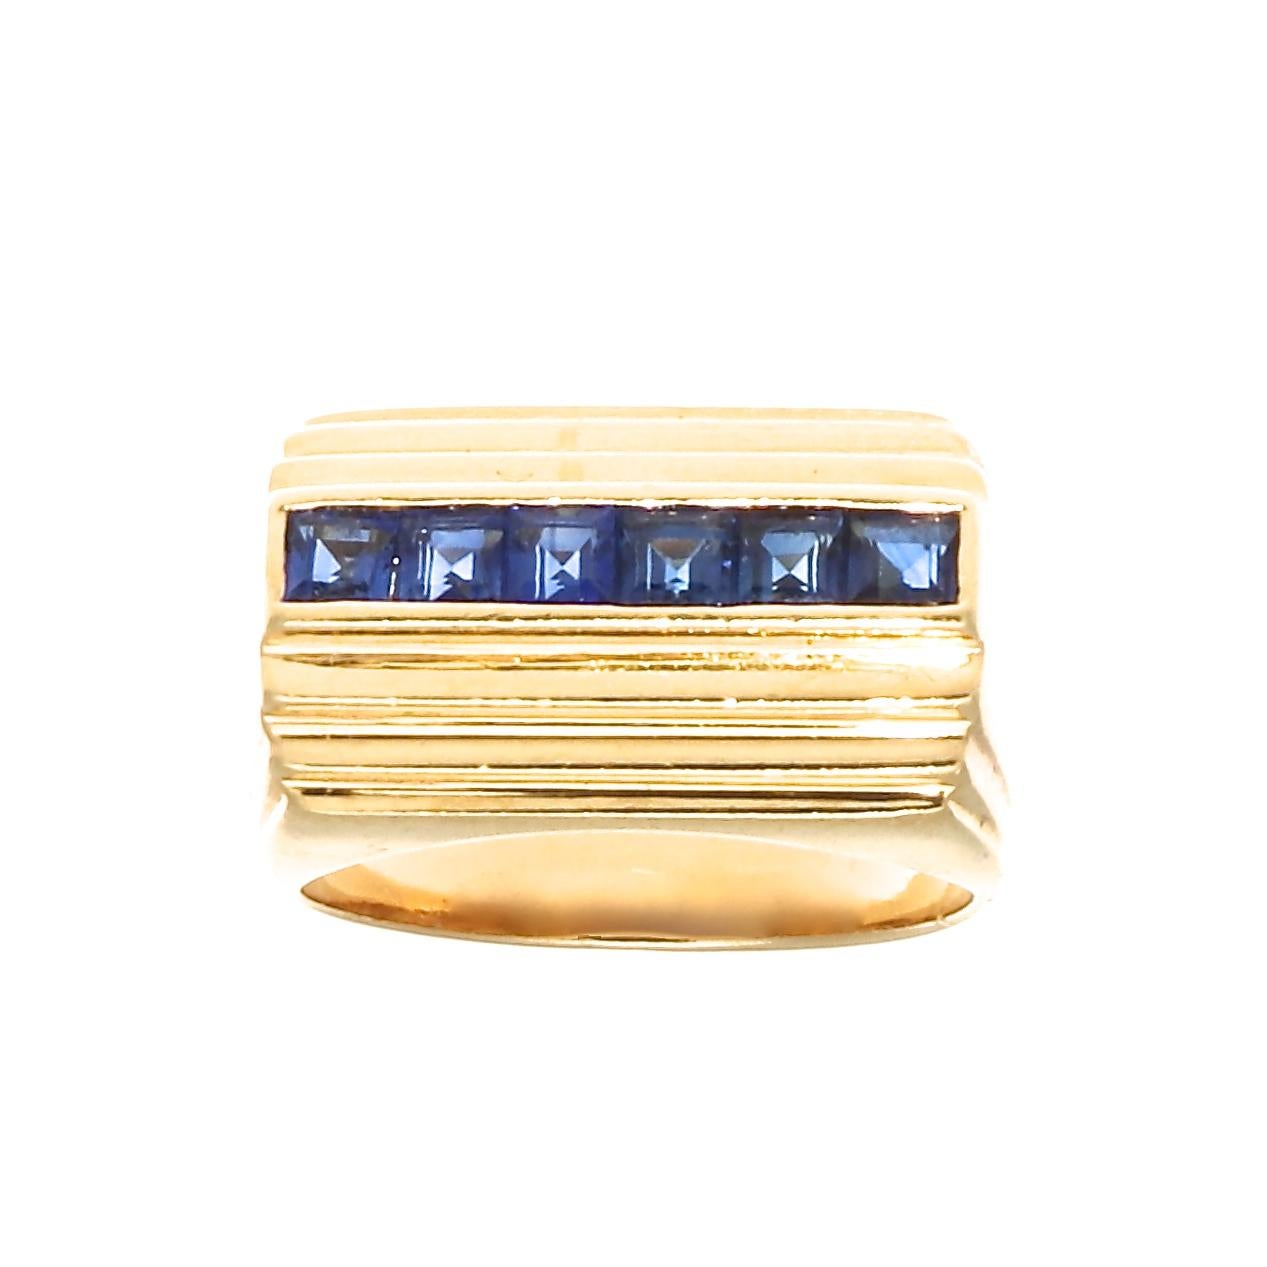 Modernism is a philosophical movement that, along with cultural trends and changes, arose from wide-scale and far-reaching transformations in Western society. Designed with a row of vibrant navy blue sapphires set between pillars of glistening 18k